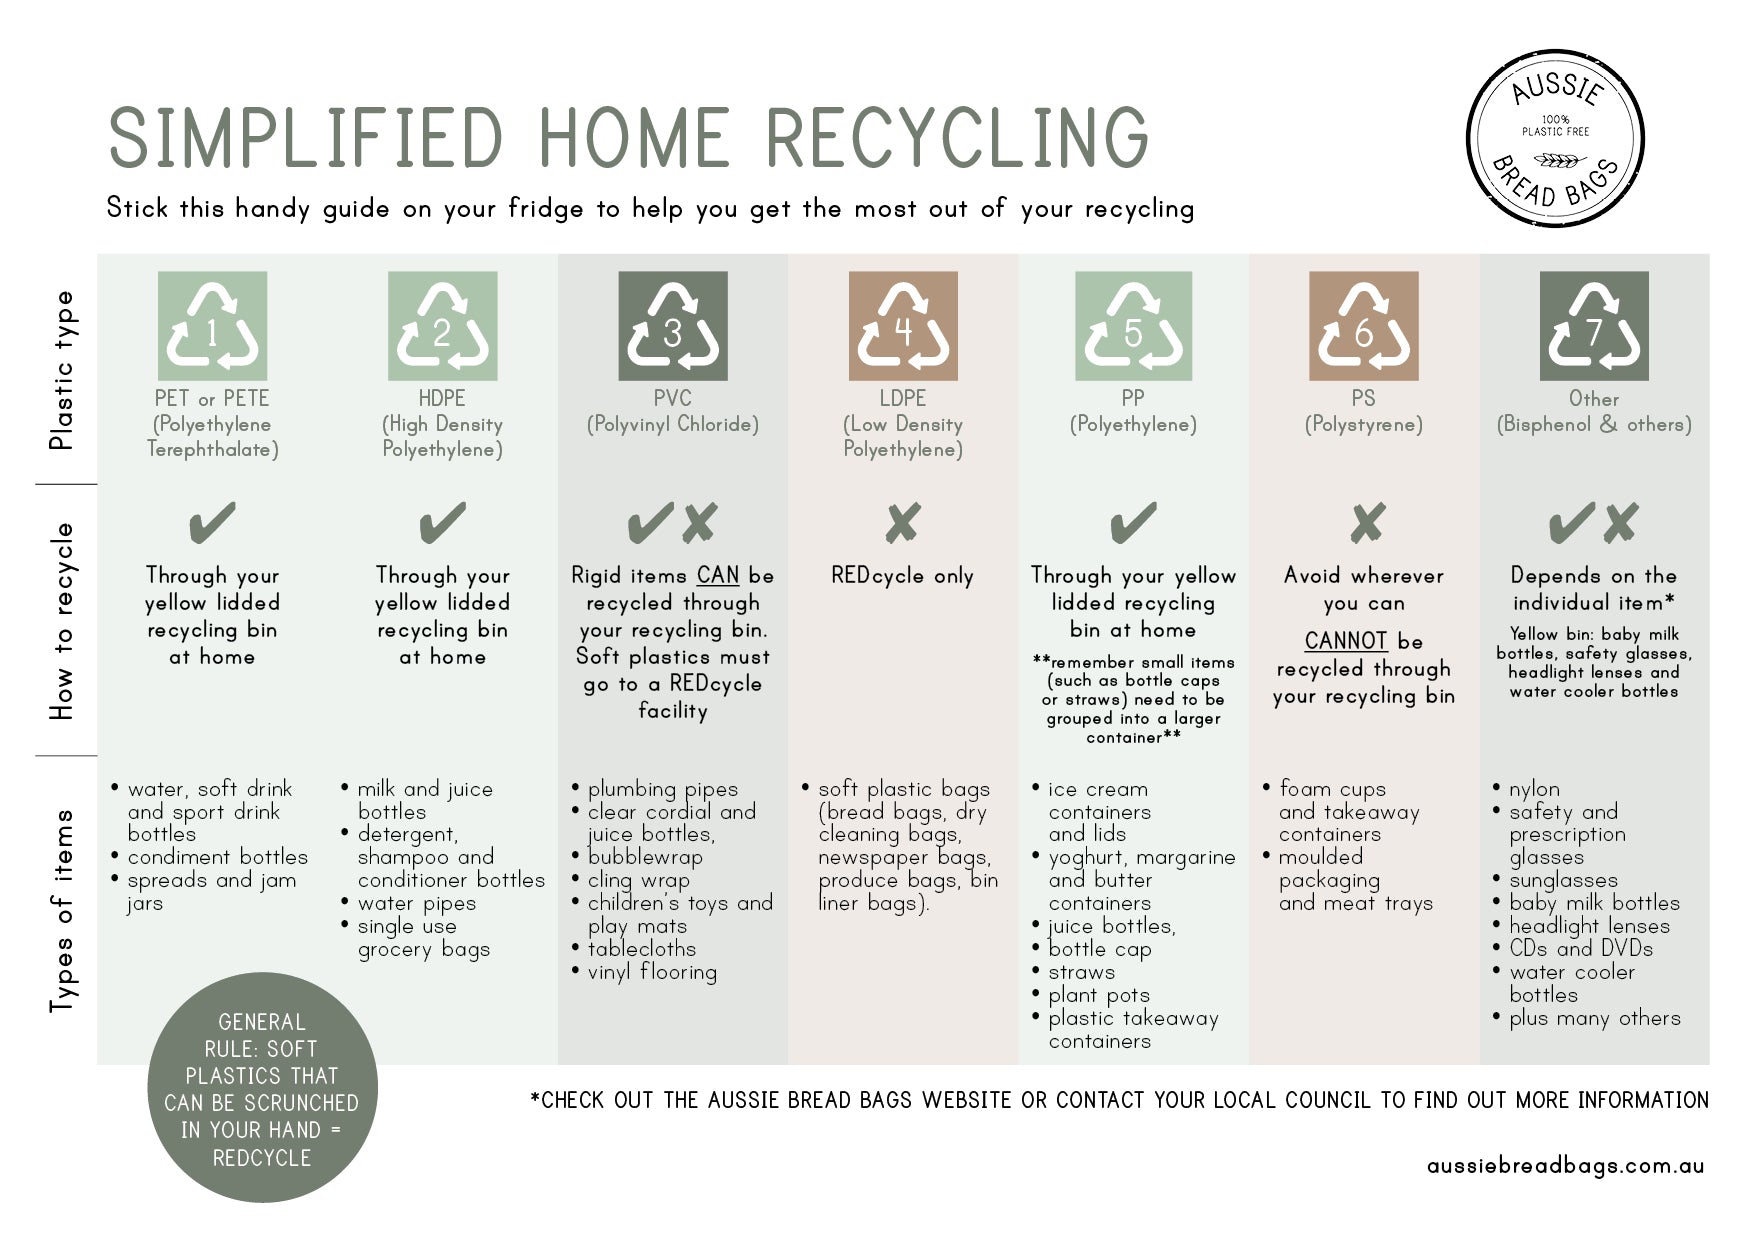 What plastics are recycled at home?